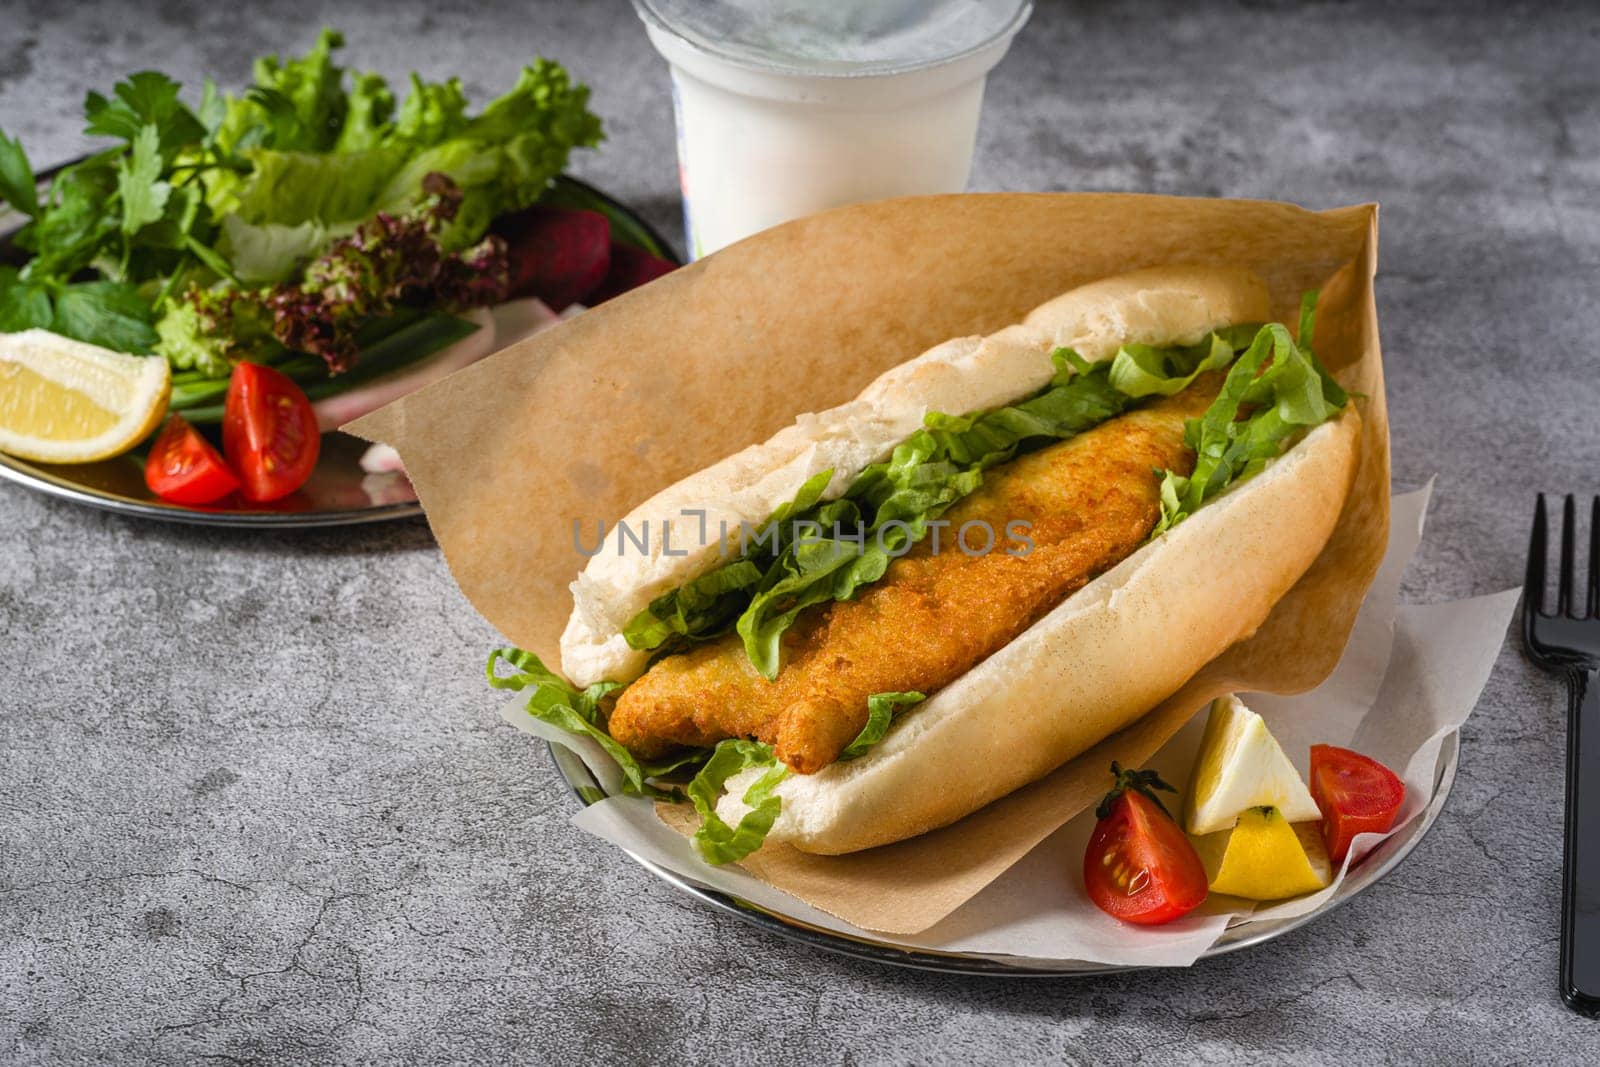 Fried fish sandwich with greens on the stone table. Turkish name Balik Ekmek by Sonat